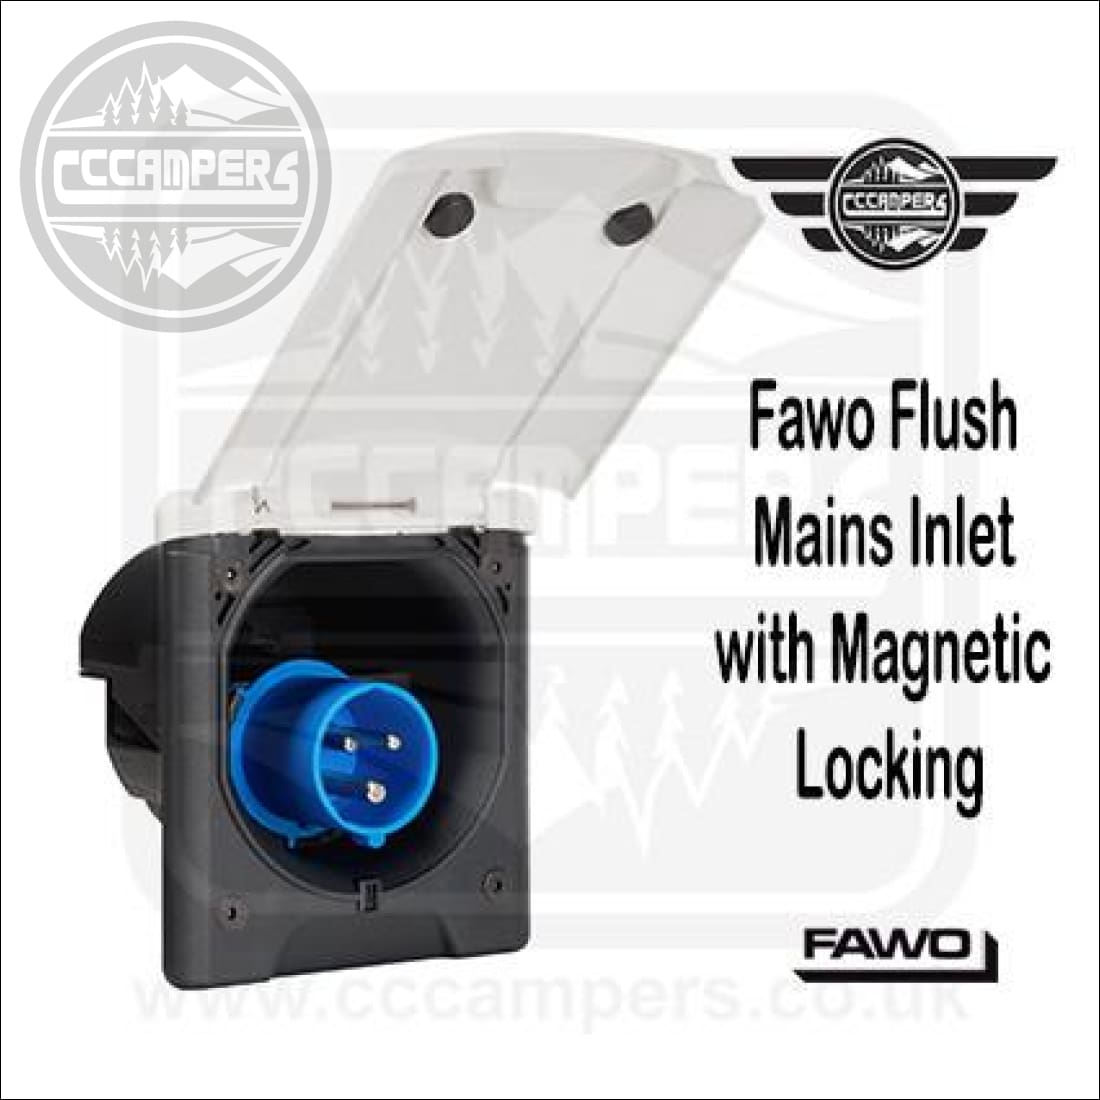 Fawo Flush Mains Inlet with Magnetic Locking - cccampers.myshopify.com